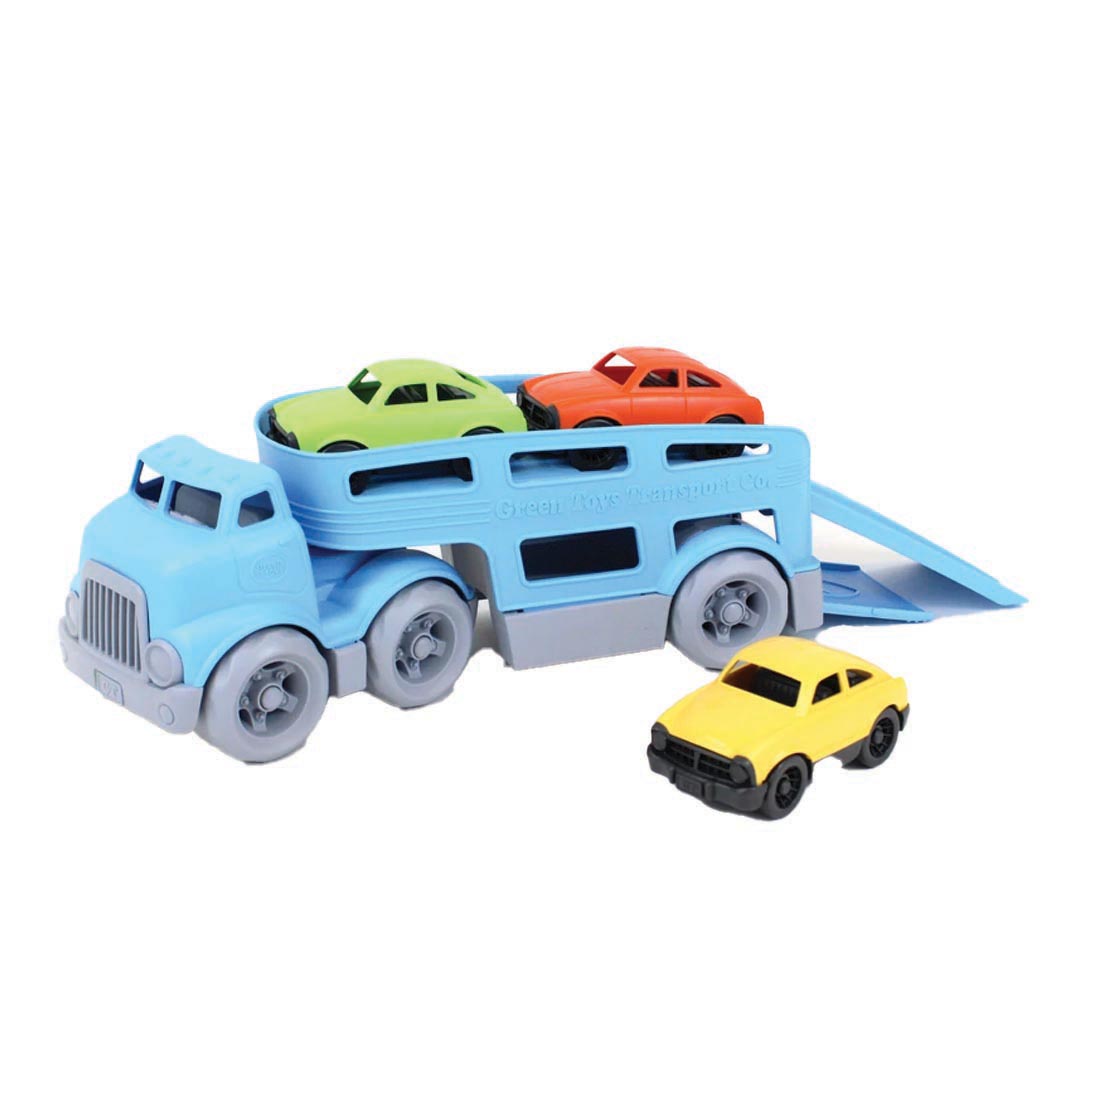 recycled plastic Car Carrier by Green Toys